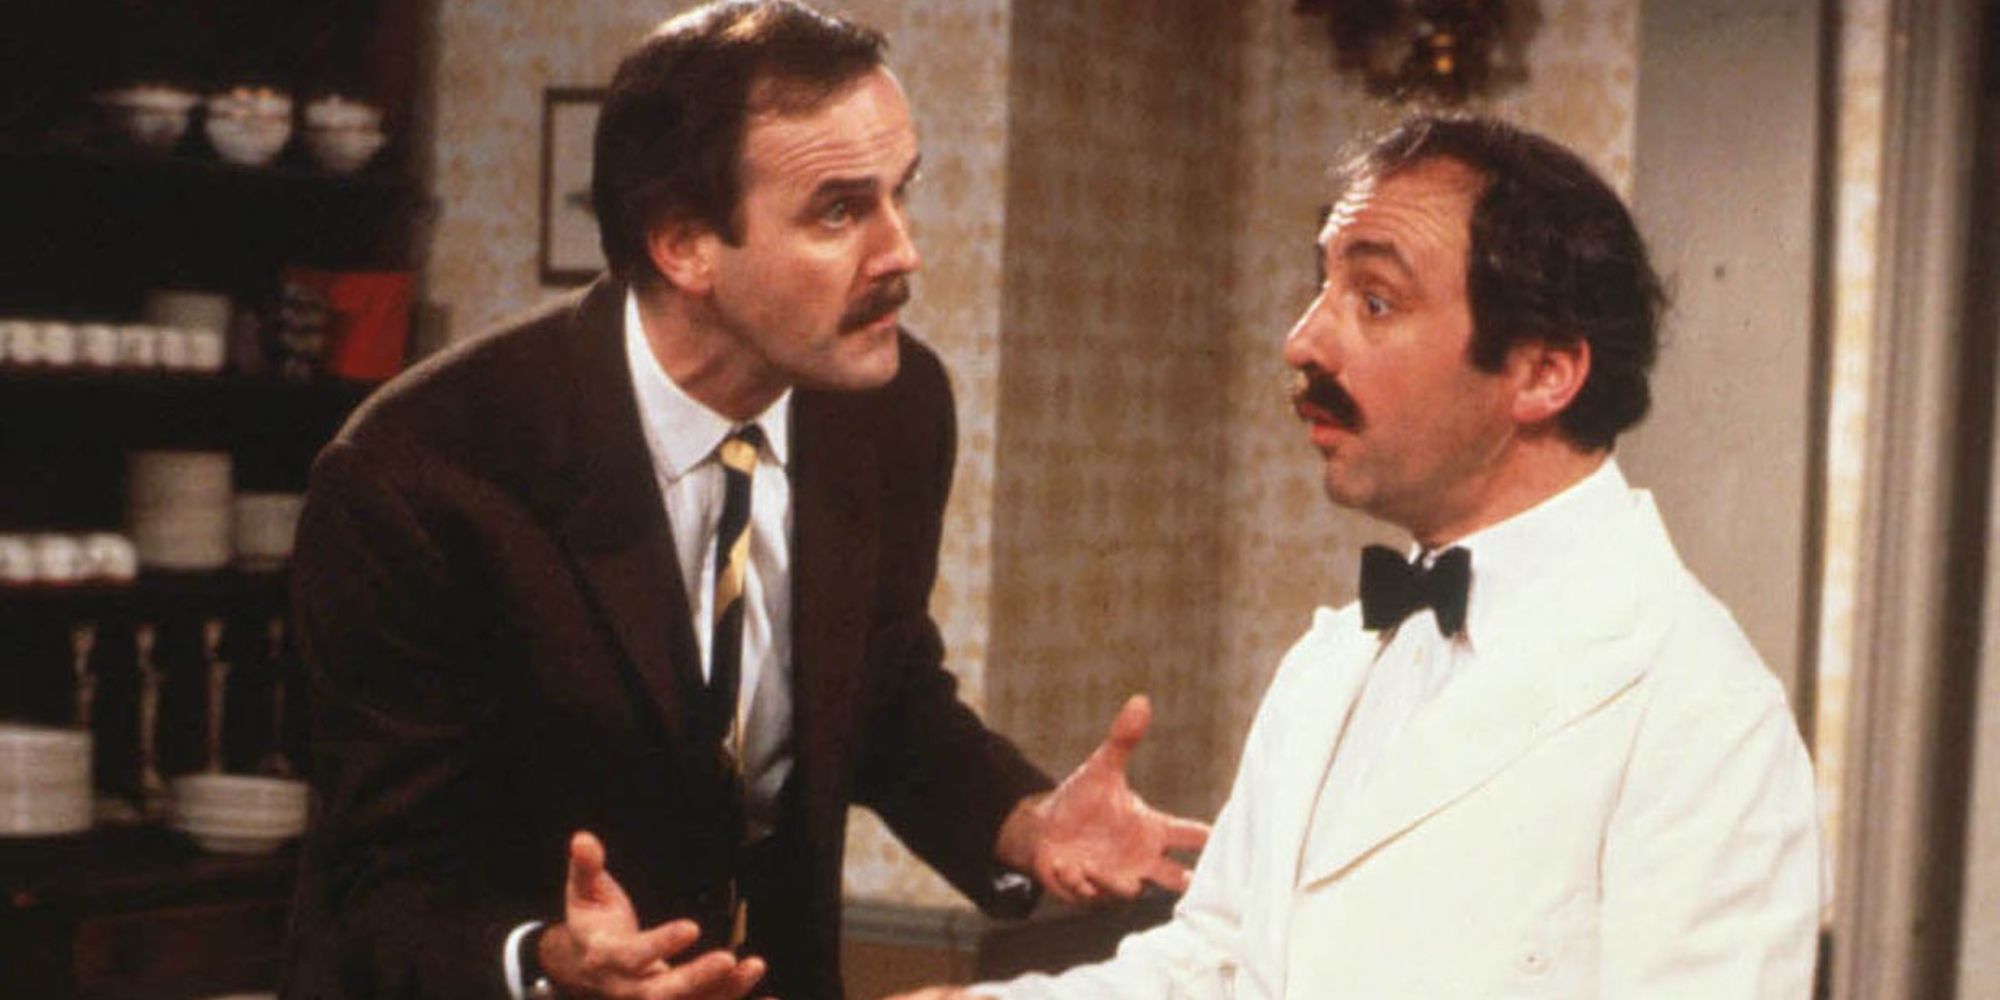 Fawlty Towers - 1975-1979